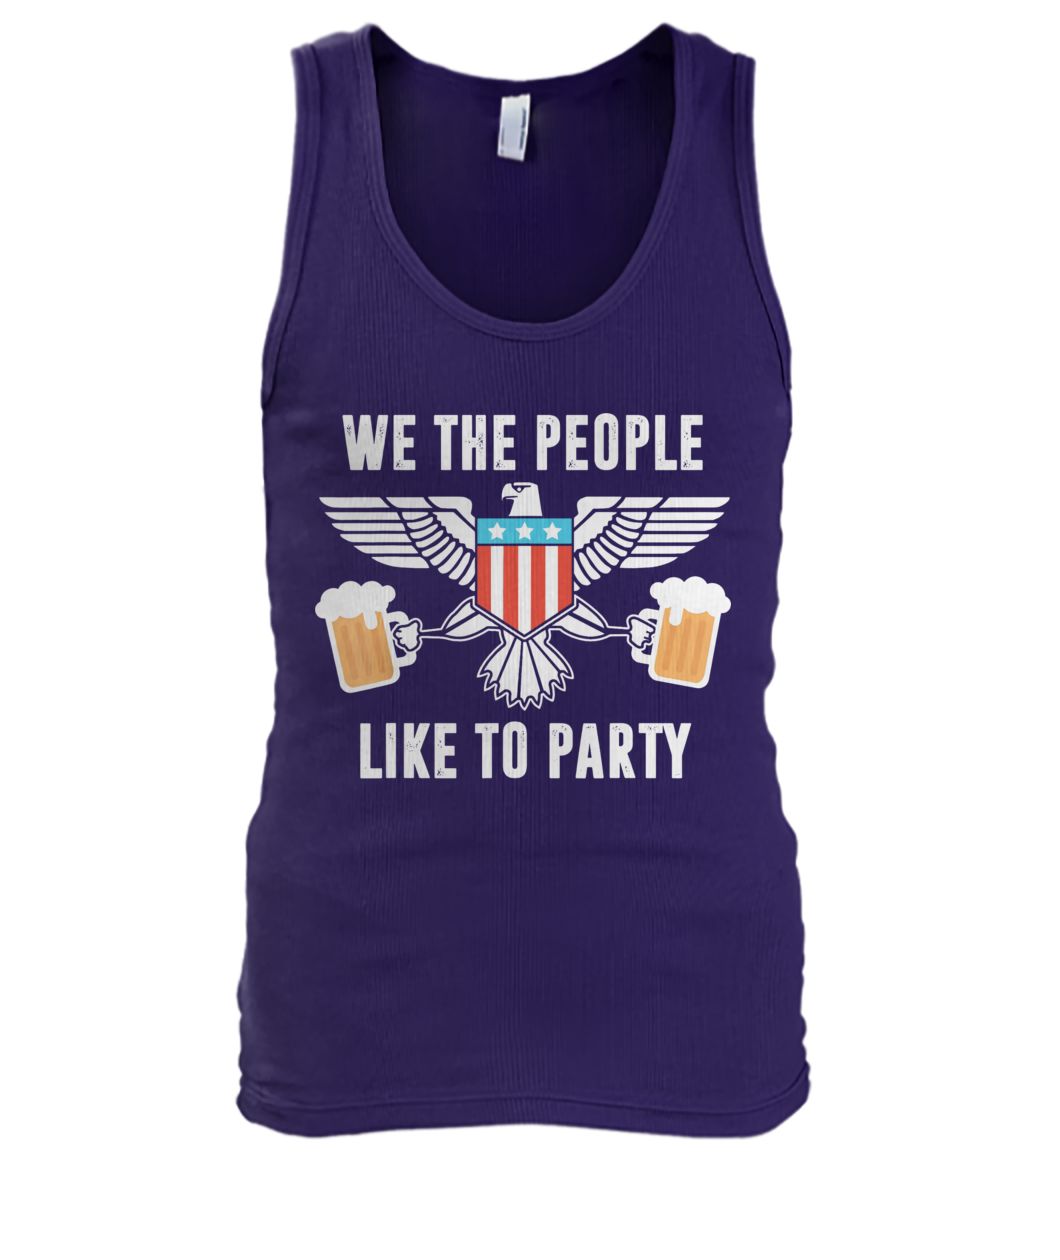 We the people like to party beer 4th of july men's tank top